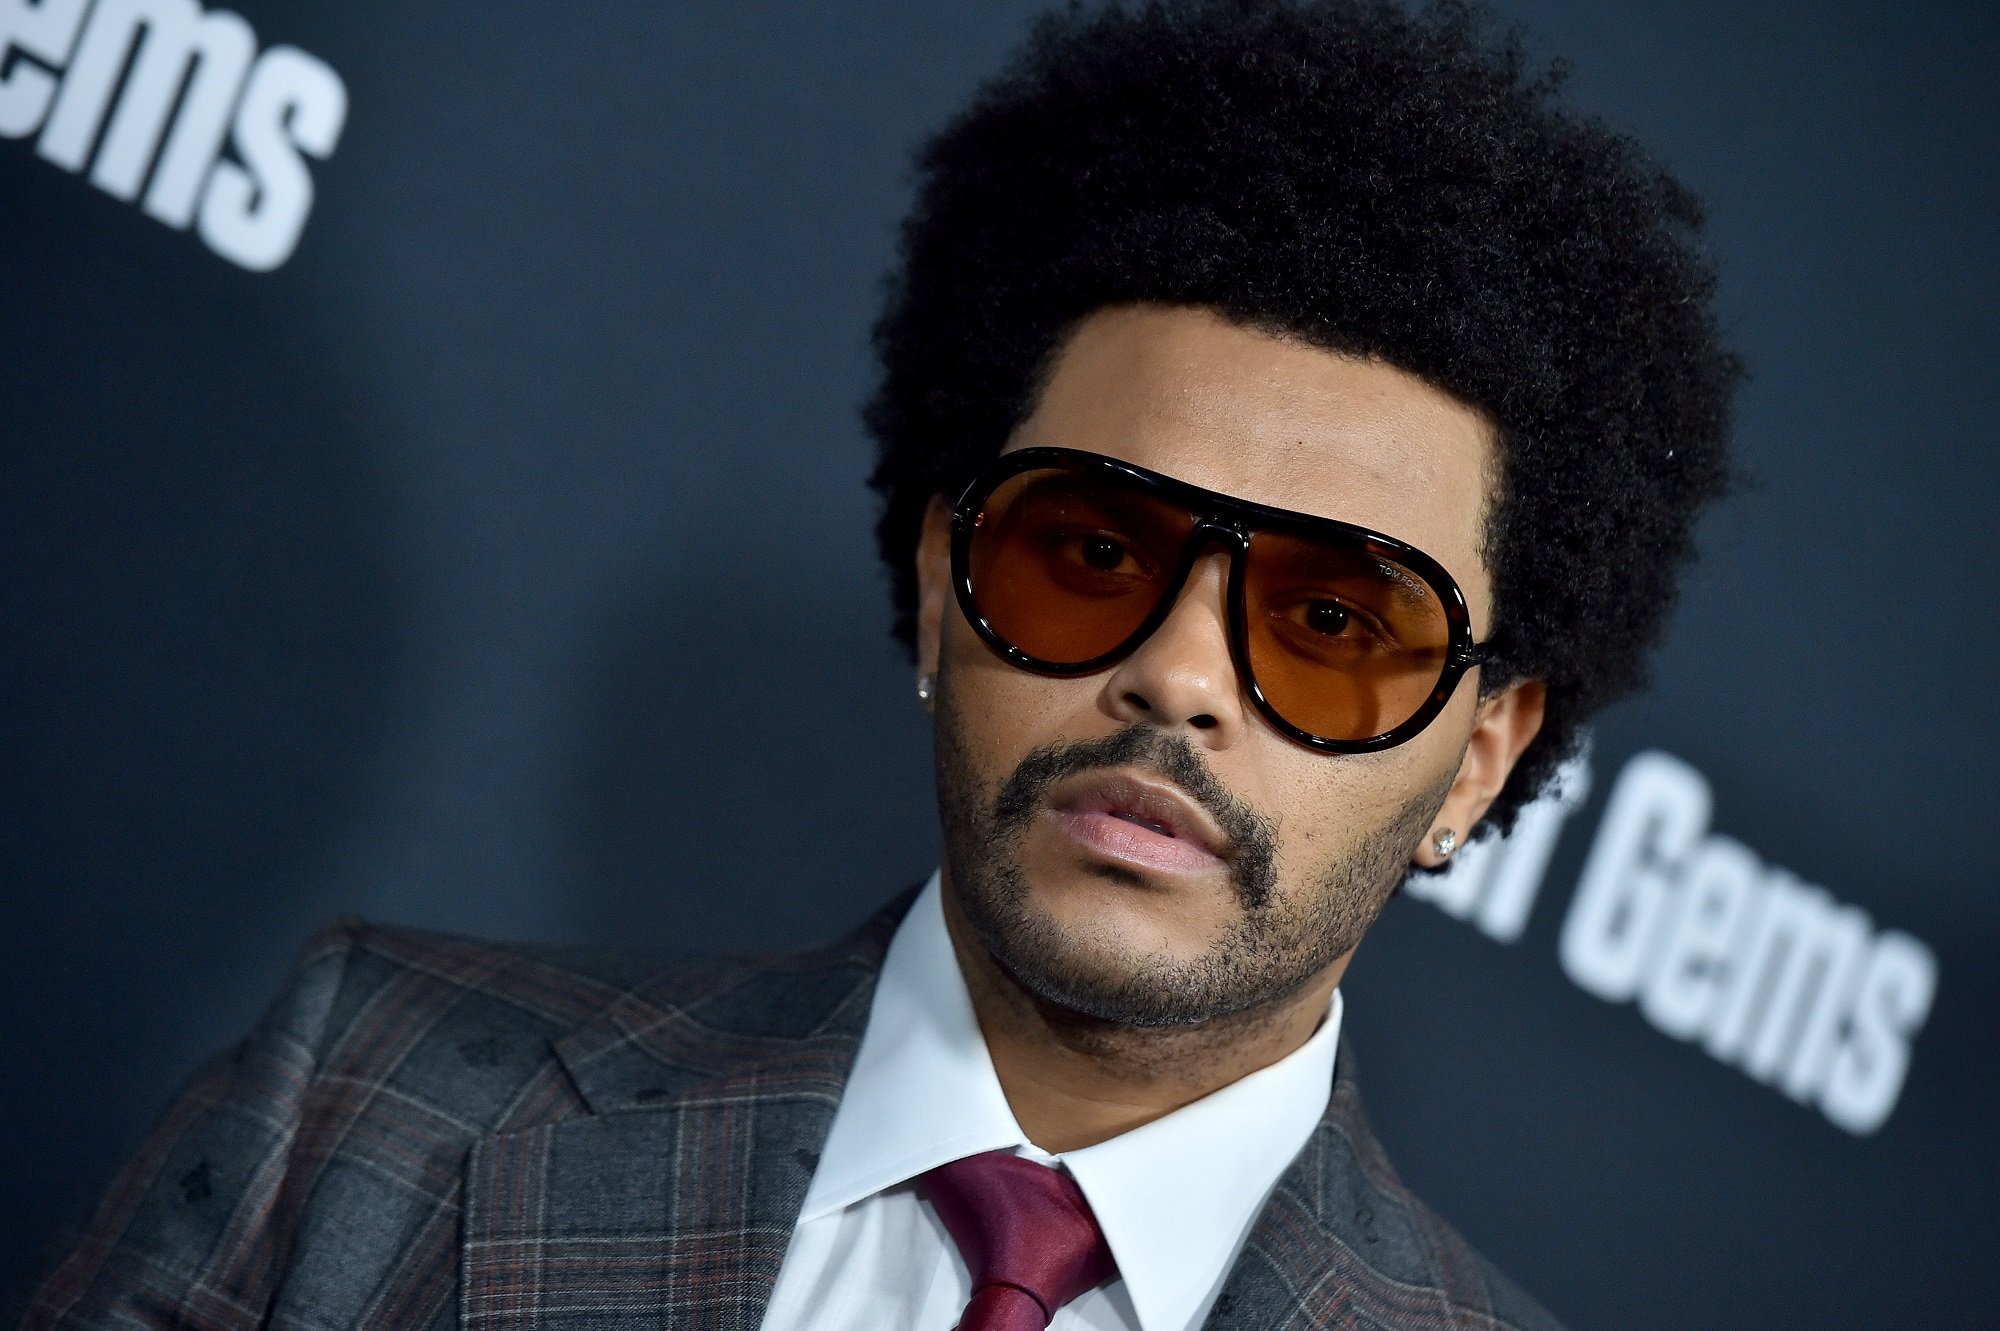 The Weeknd wearing sunglasses and a suit at the premiere of A24's 'Uncut Gems'